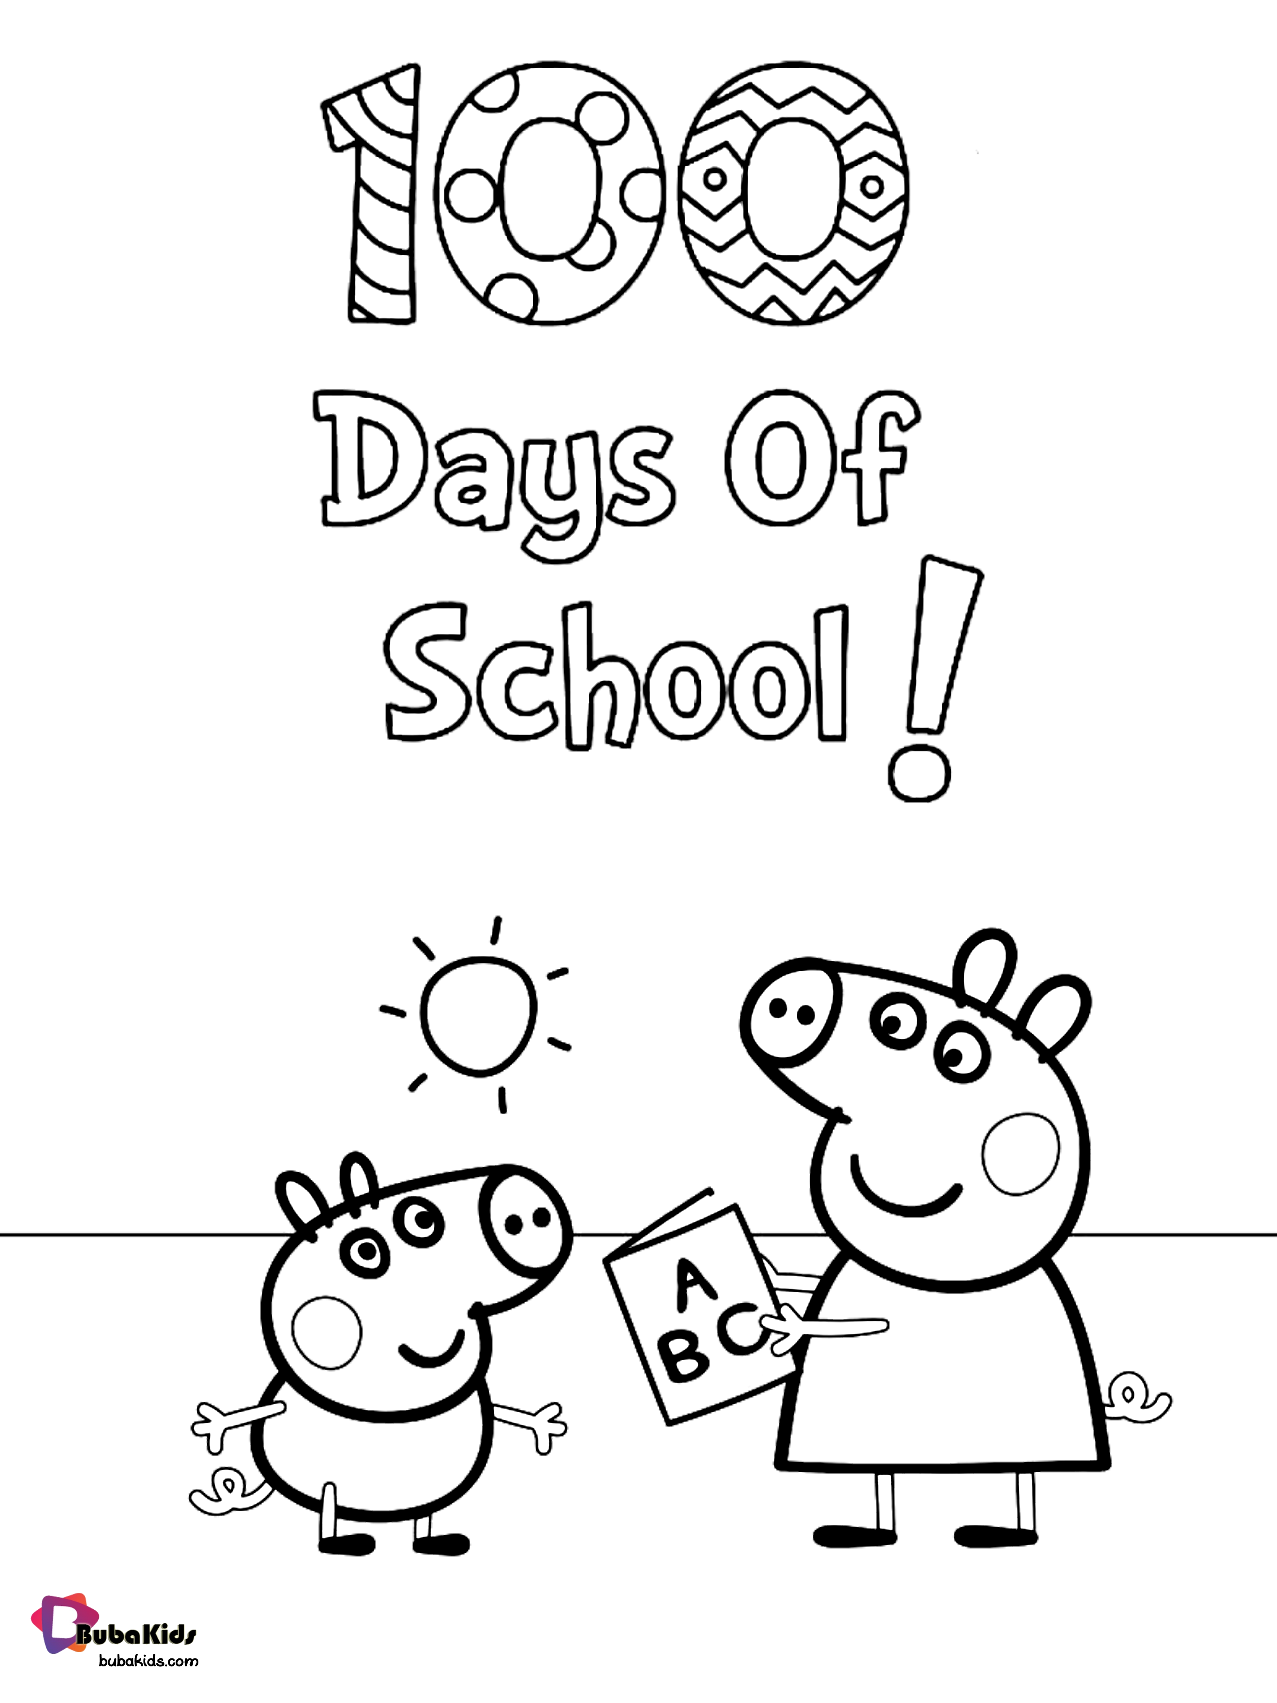 Peppa Pig 100 days of school coloring page Wallpaper